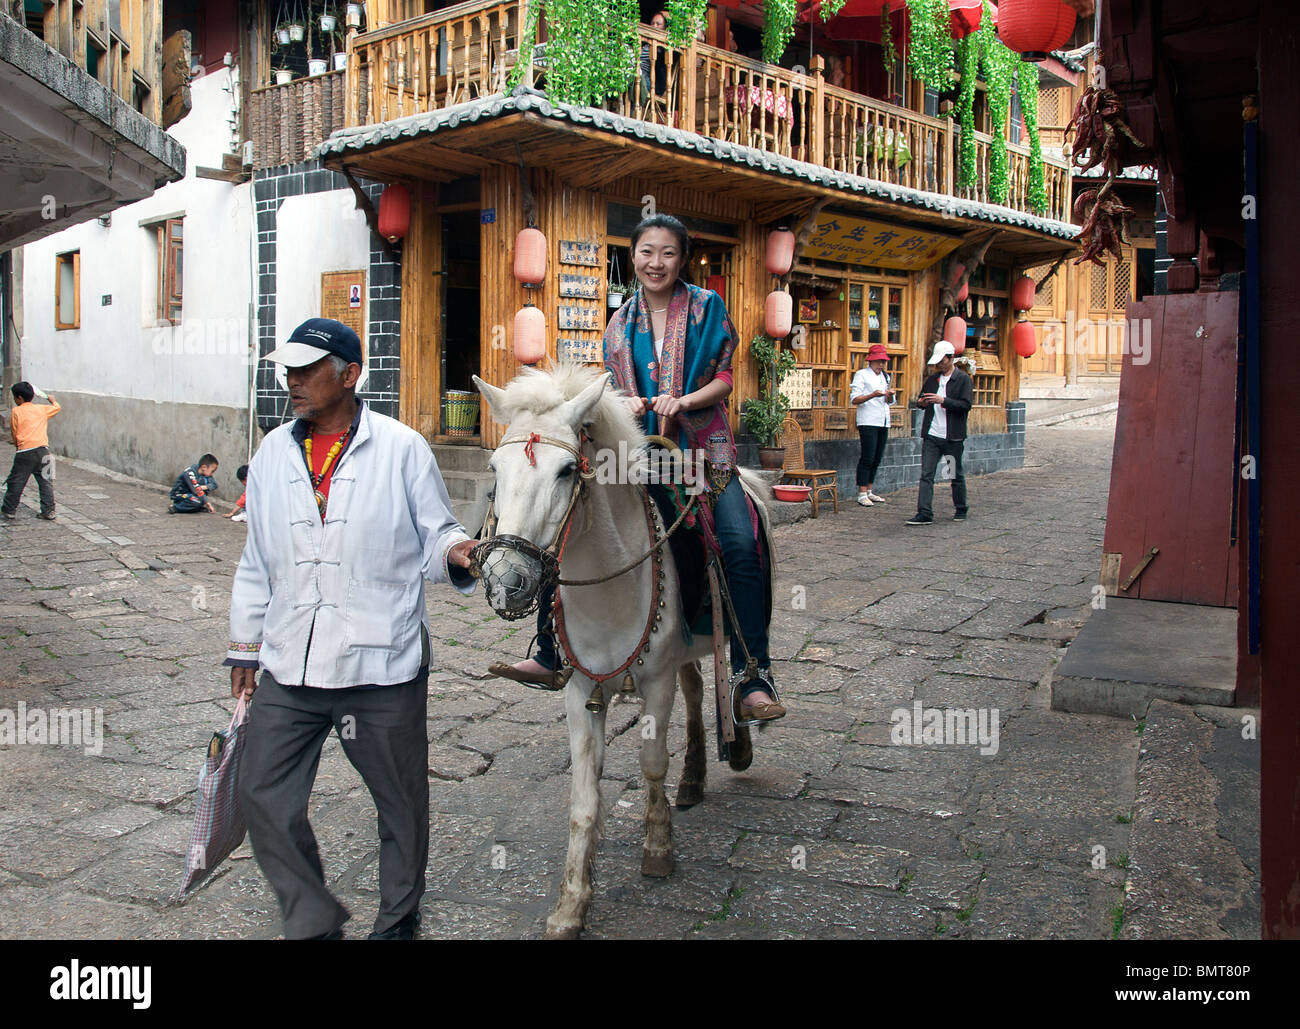 Woman on horse being lead through street Lijiang Old Town Yunnan China Stock Photo